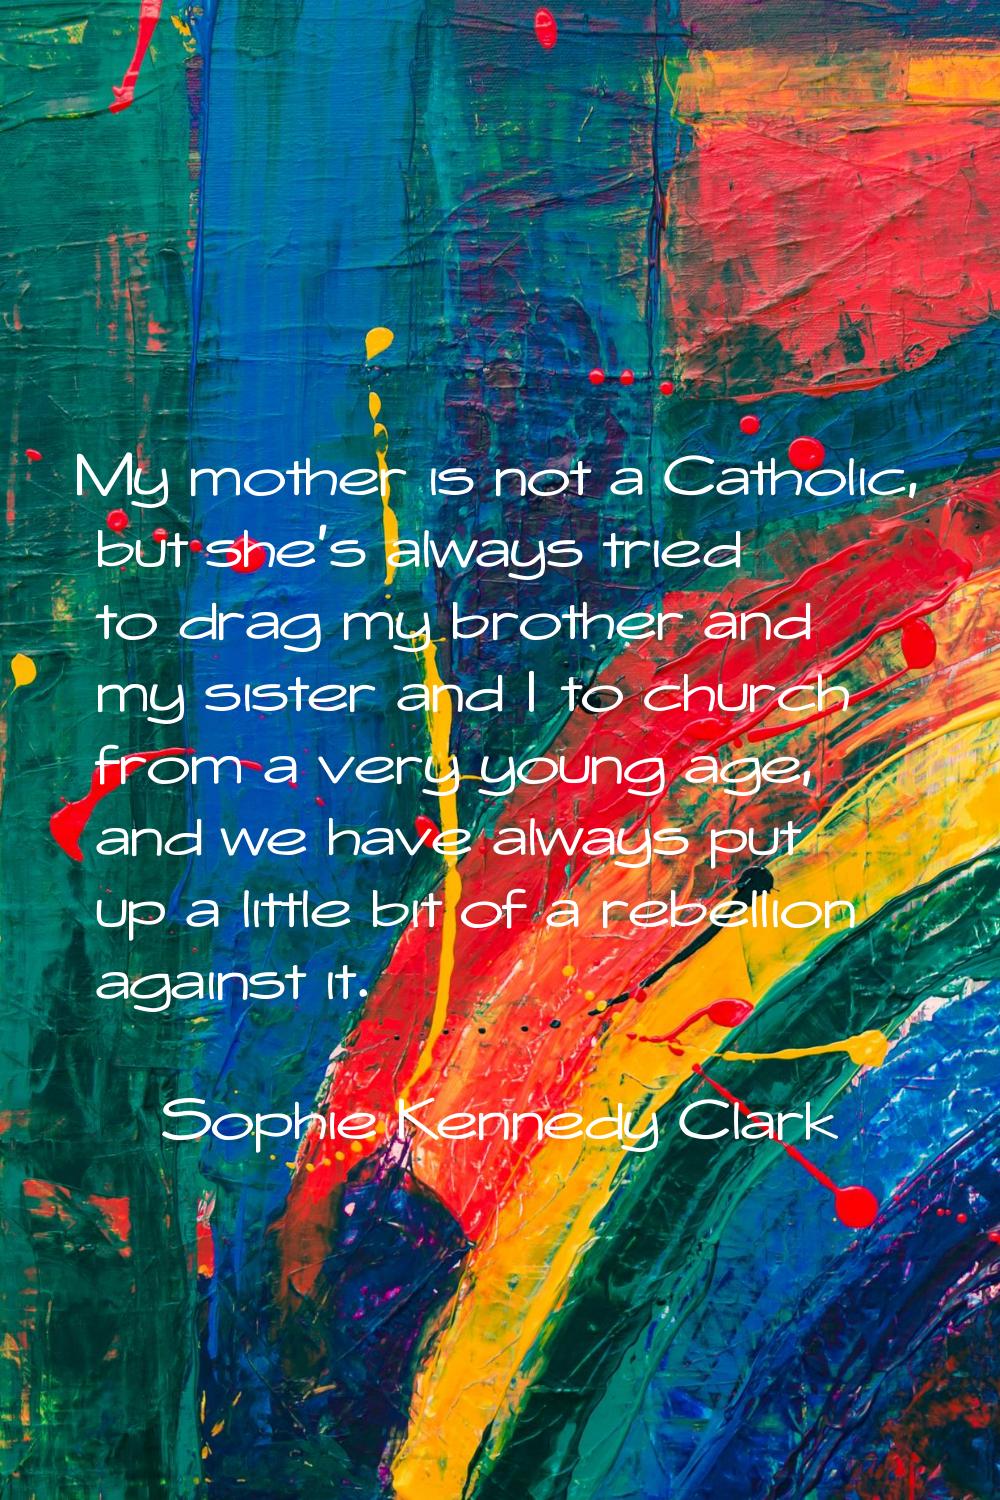 My mother is not a Catholic, but she's always tried to drag my brother and my sister and I to churc